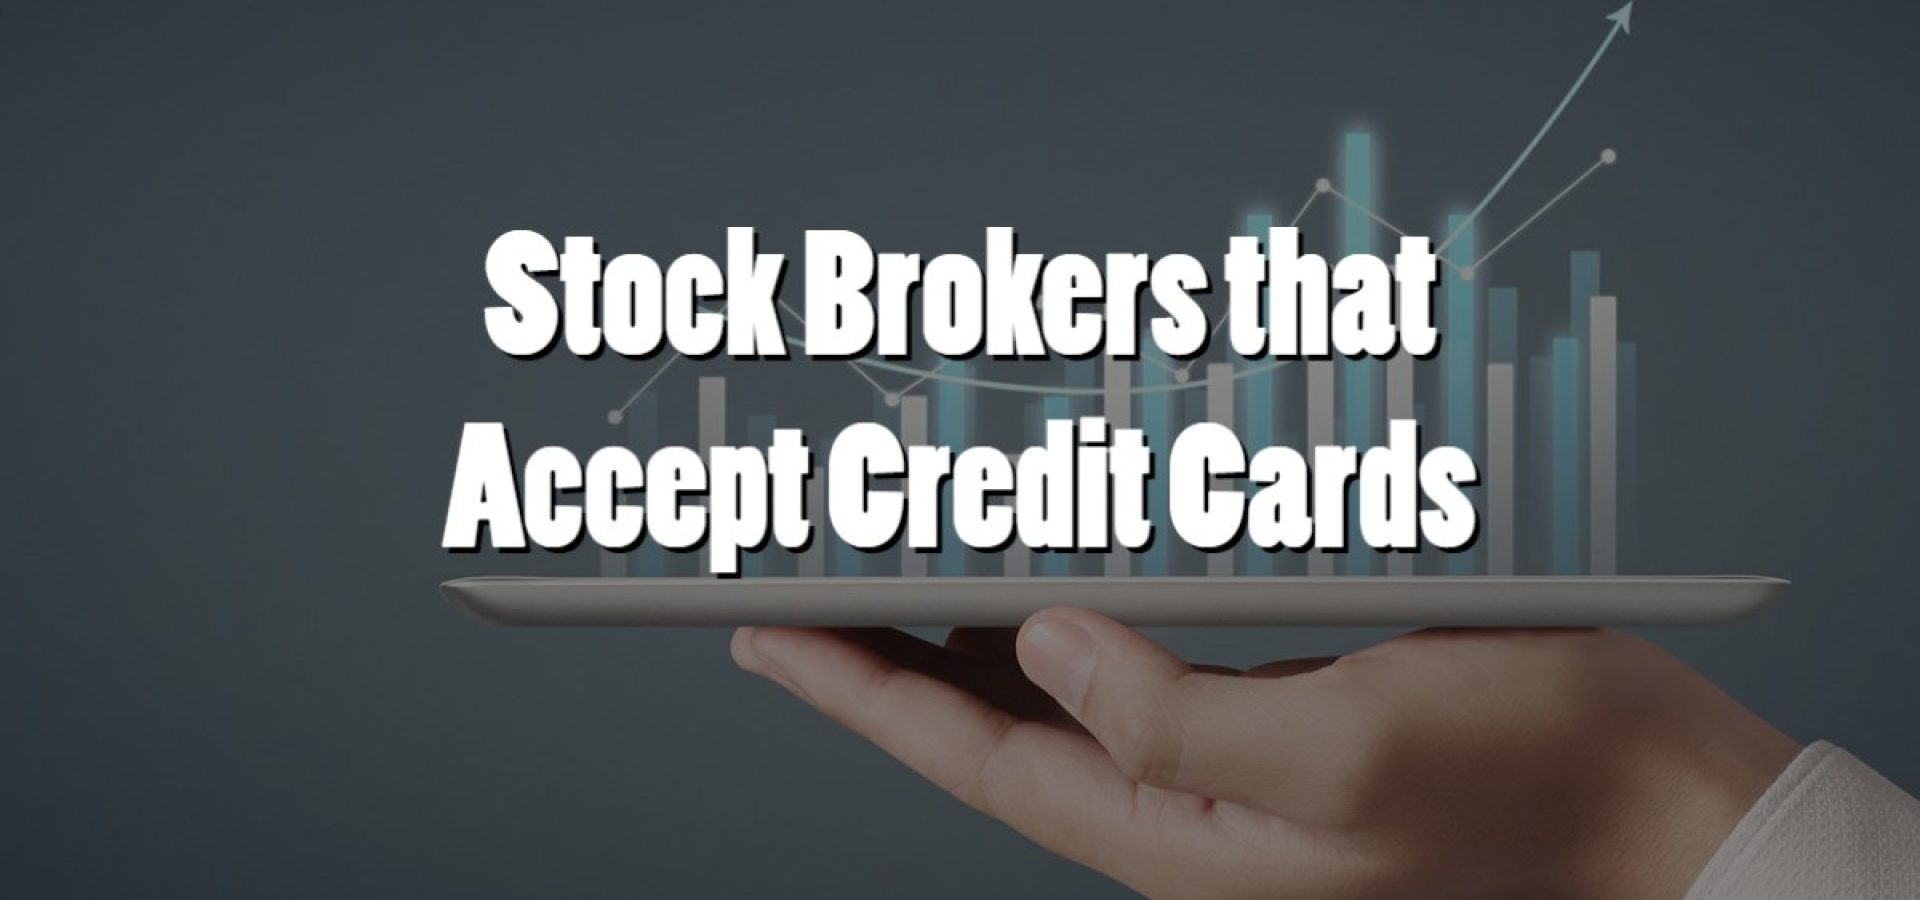 Stock Brokers that Accept Credit Cards